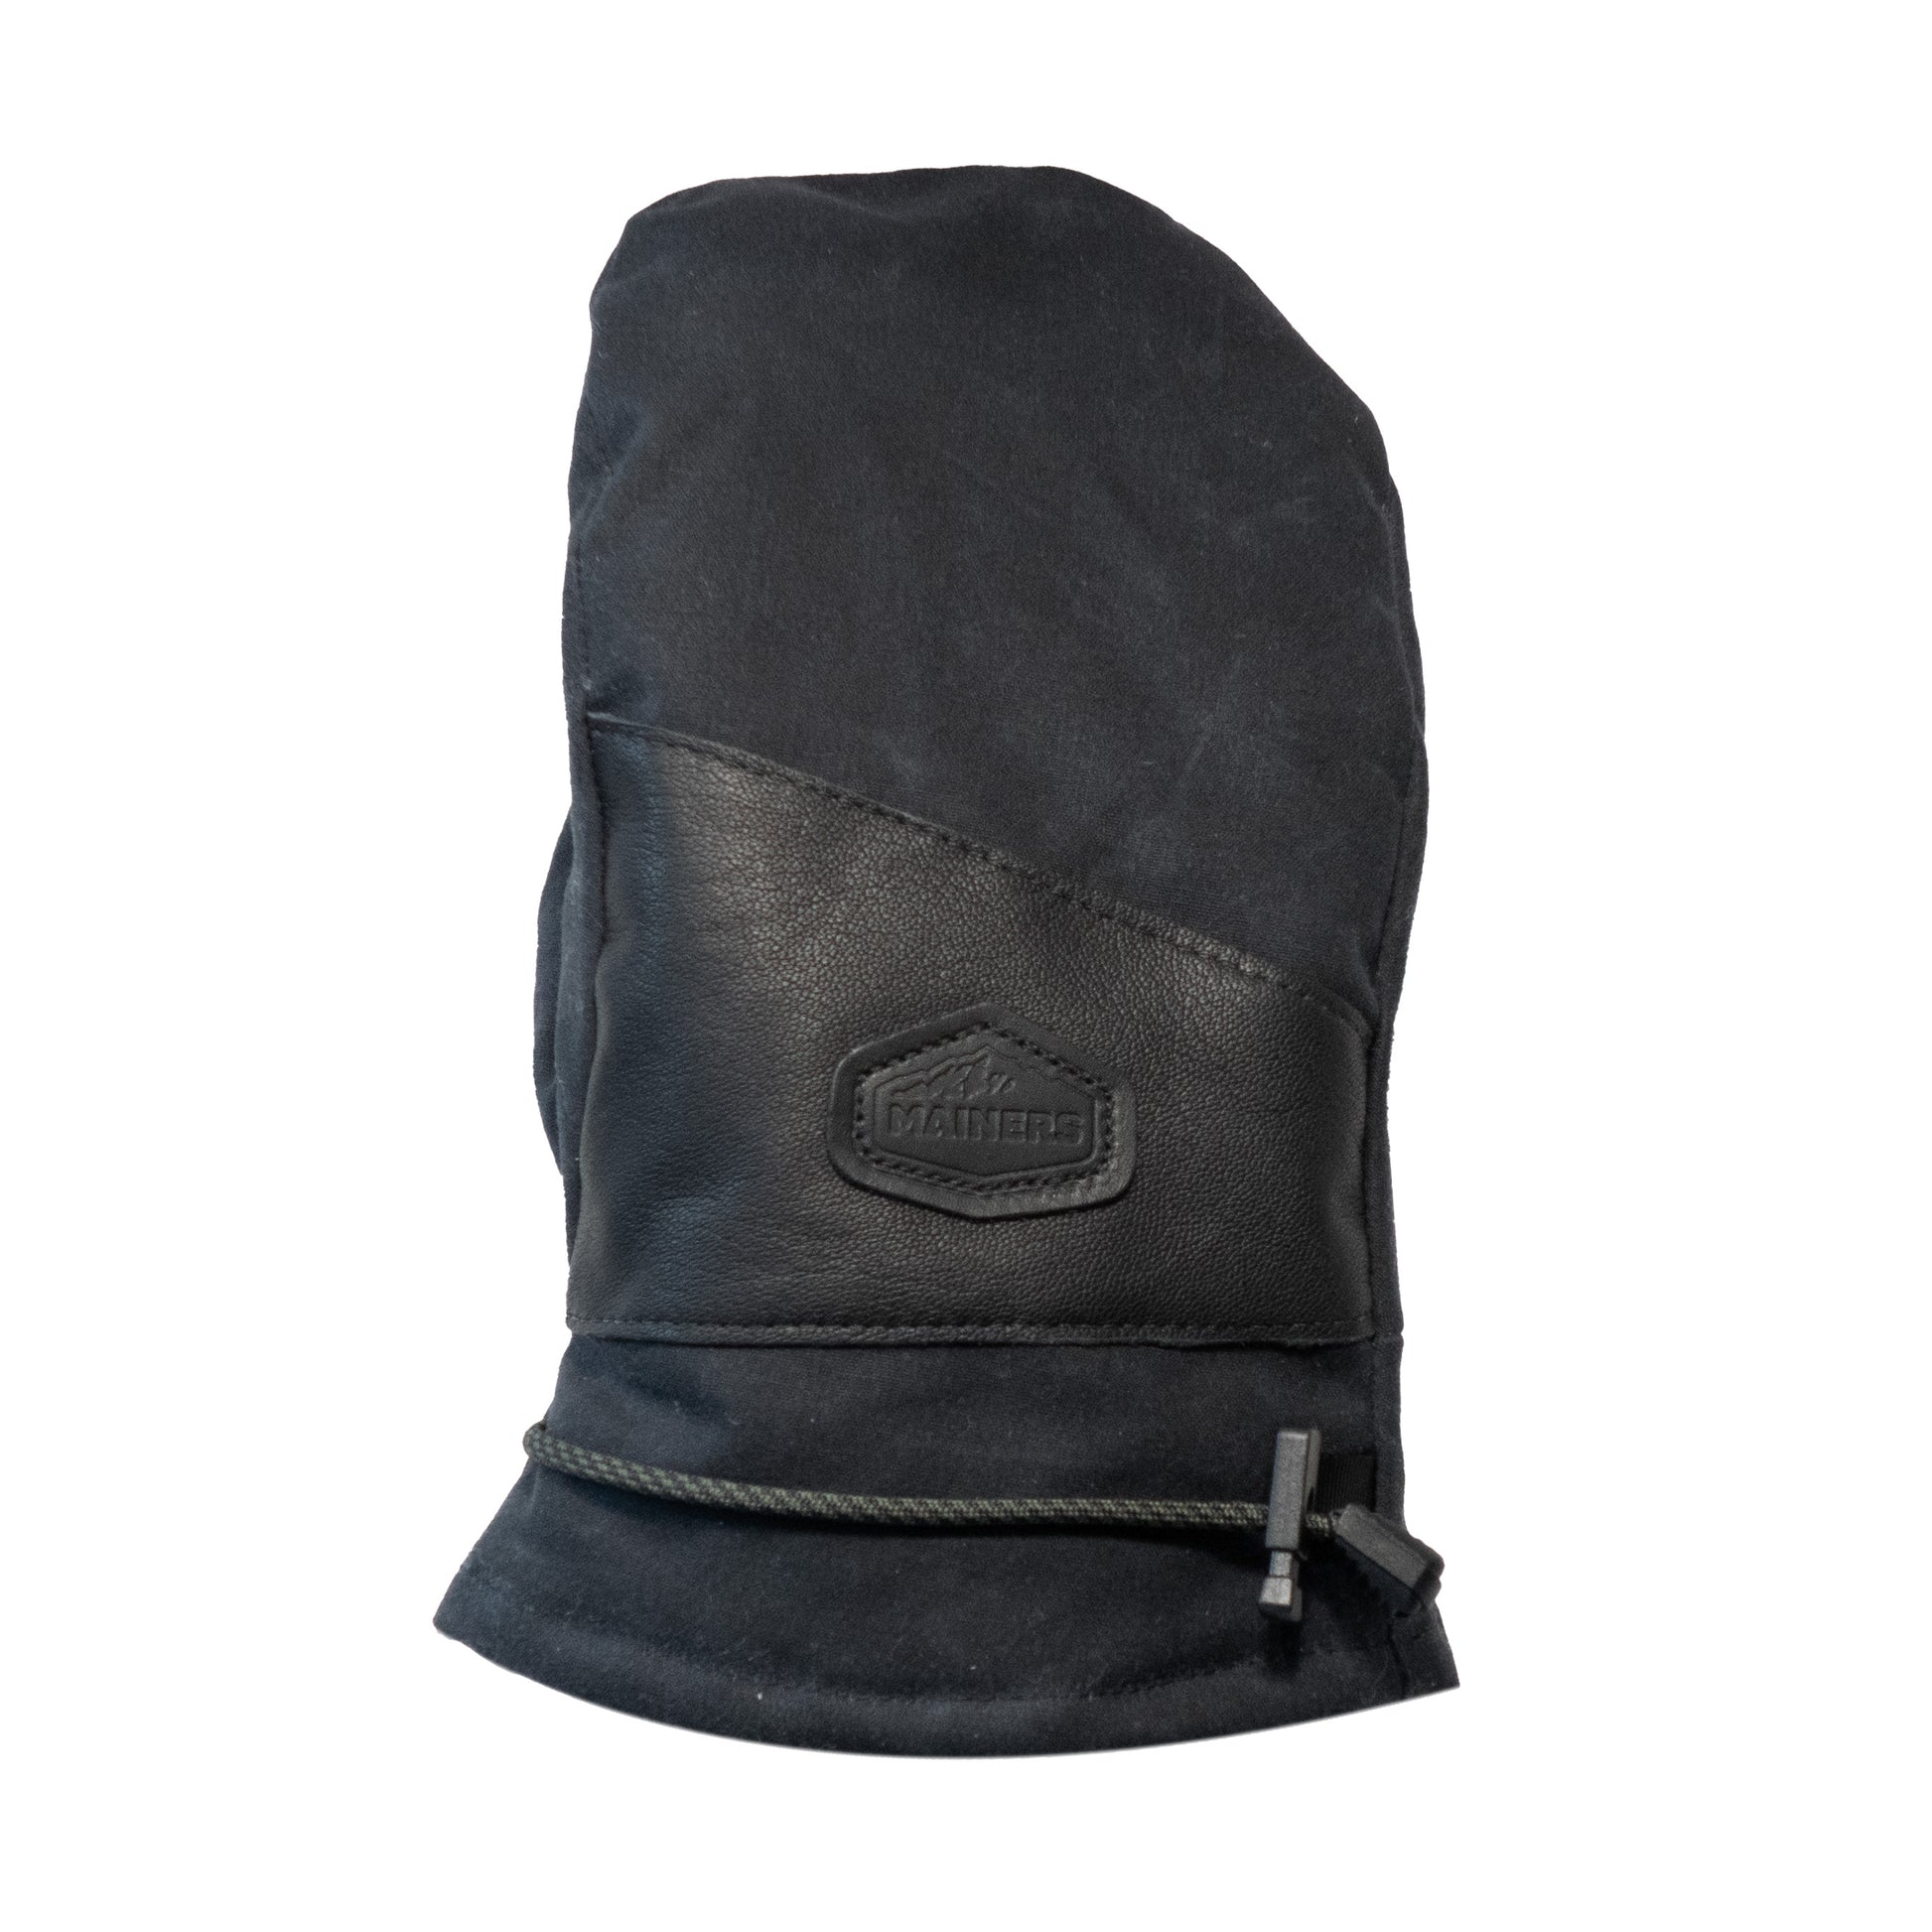 A black leather Mainers Peaks Mitts with a zipper on the side.